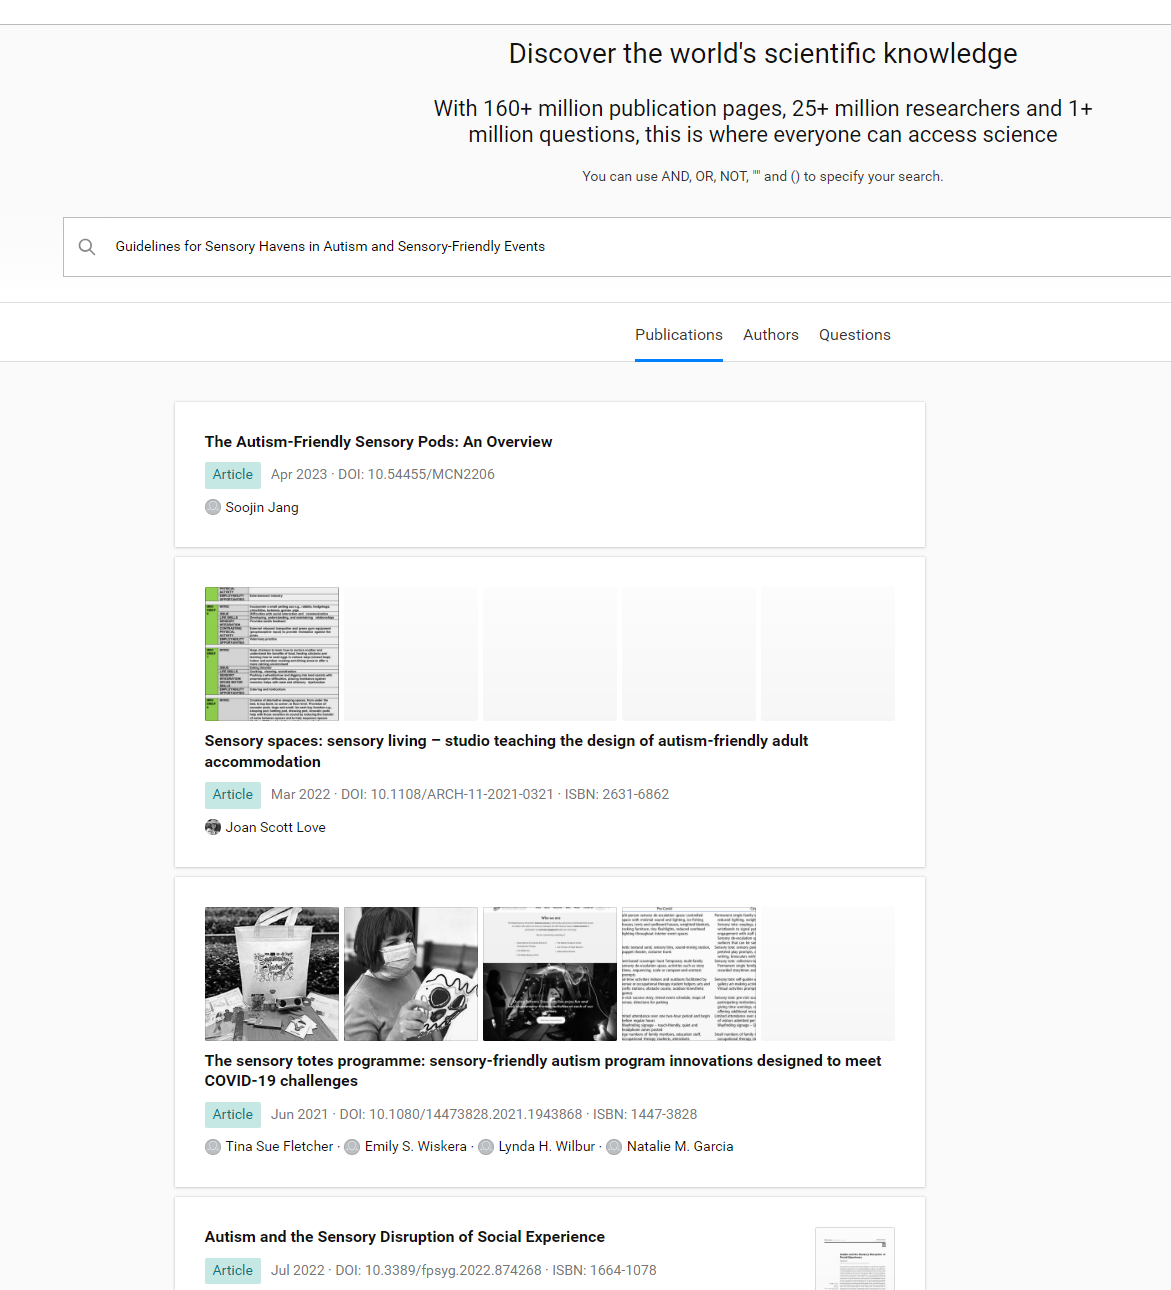 screenshot of a ResearchGate search for "Guidelines for Sensory Havens in Autism and Sensory-Friendly Events." The top result is a different article.